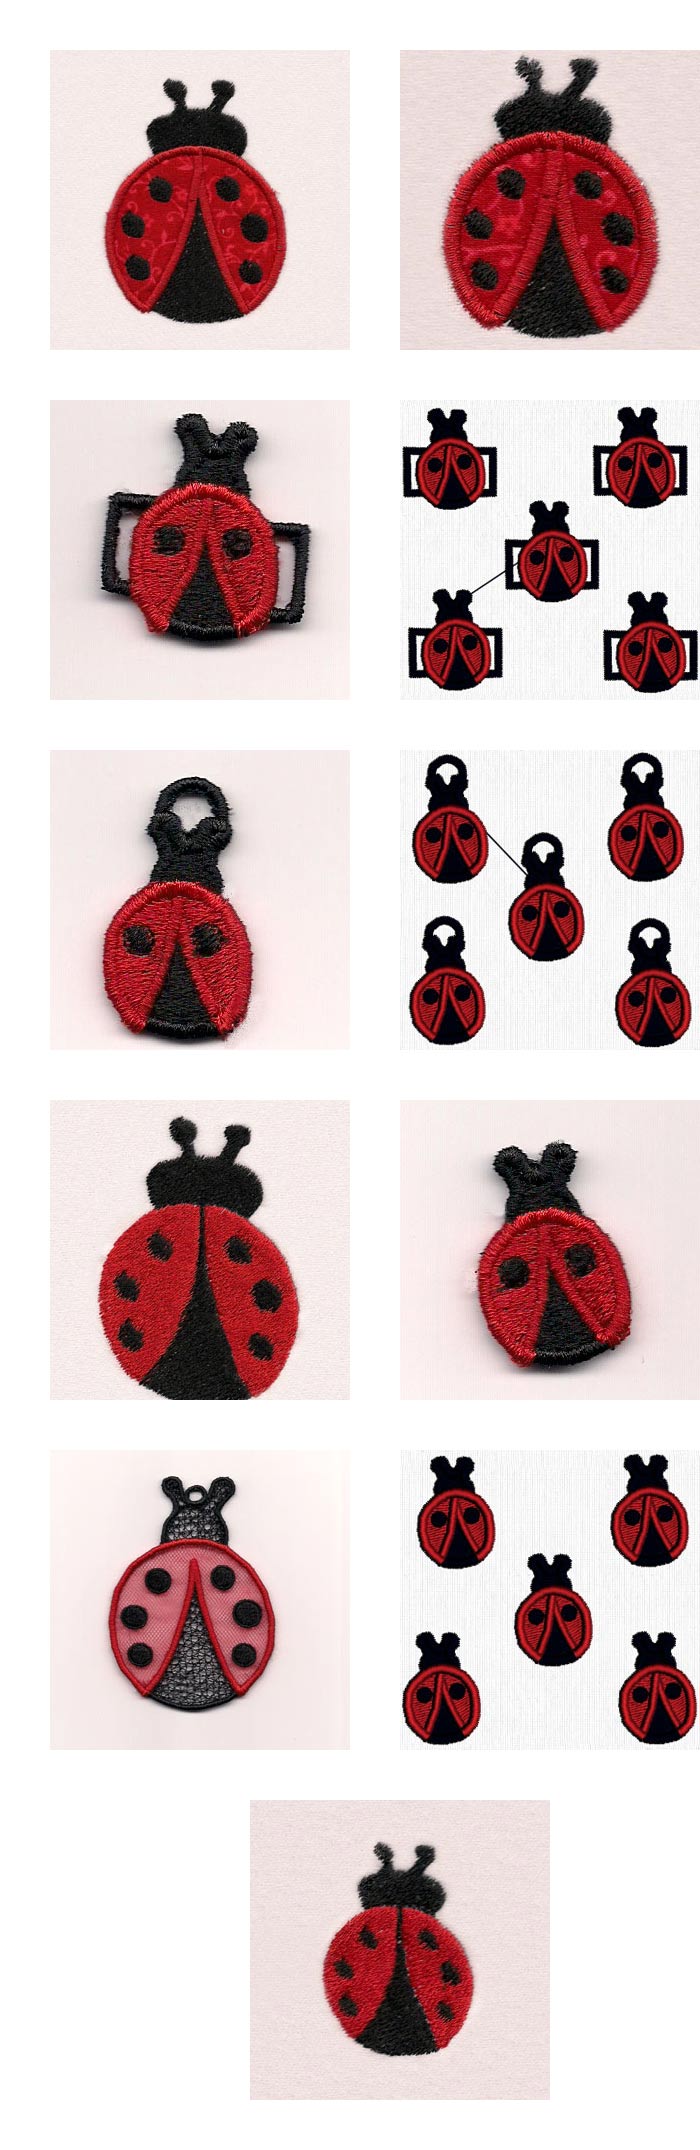 Ladybug Beads and Things Embroidery Machine Design Details